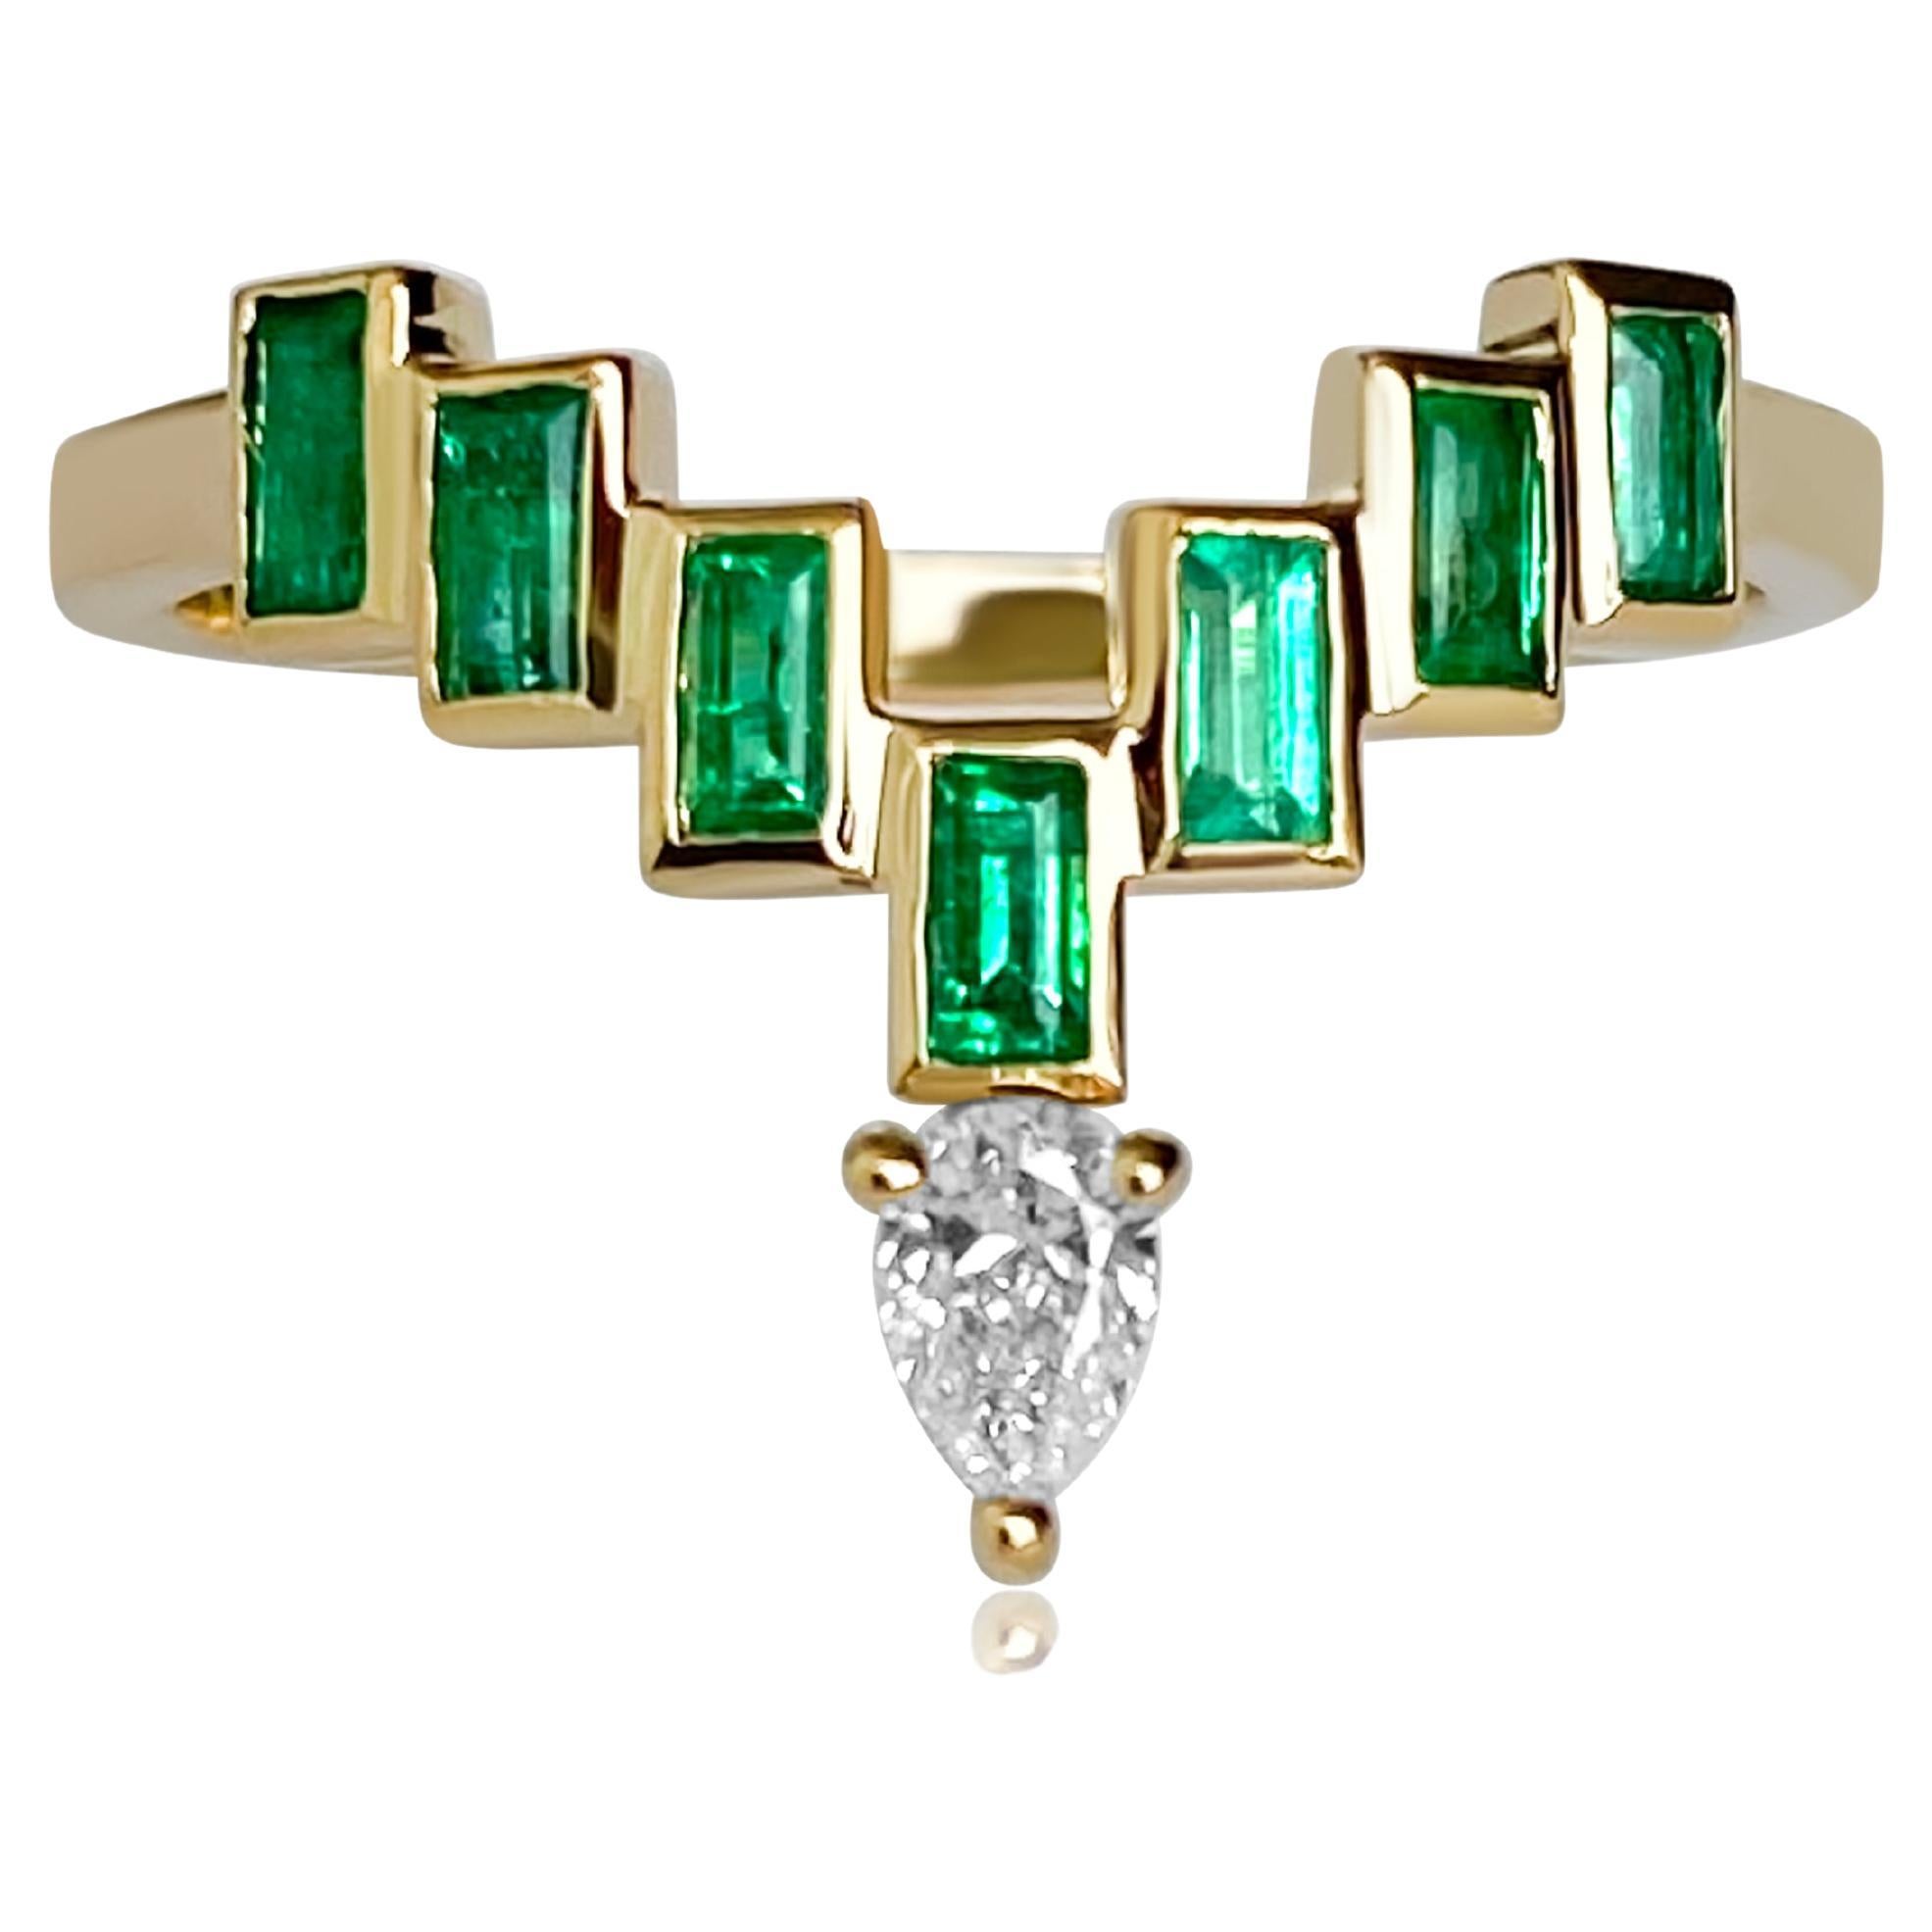 Enlightenment Celestial Crown Tiara Emerald Baguette and Brilliant Diamond Ring For Sale